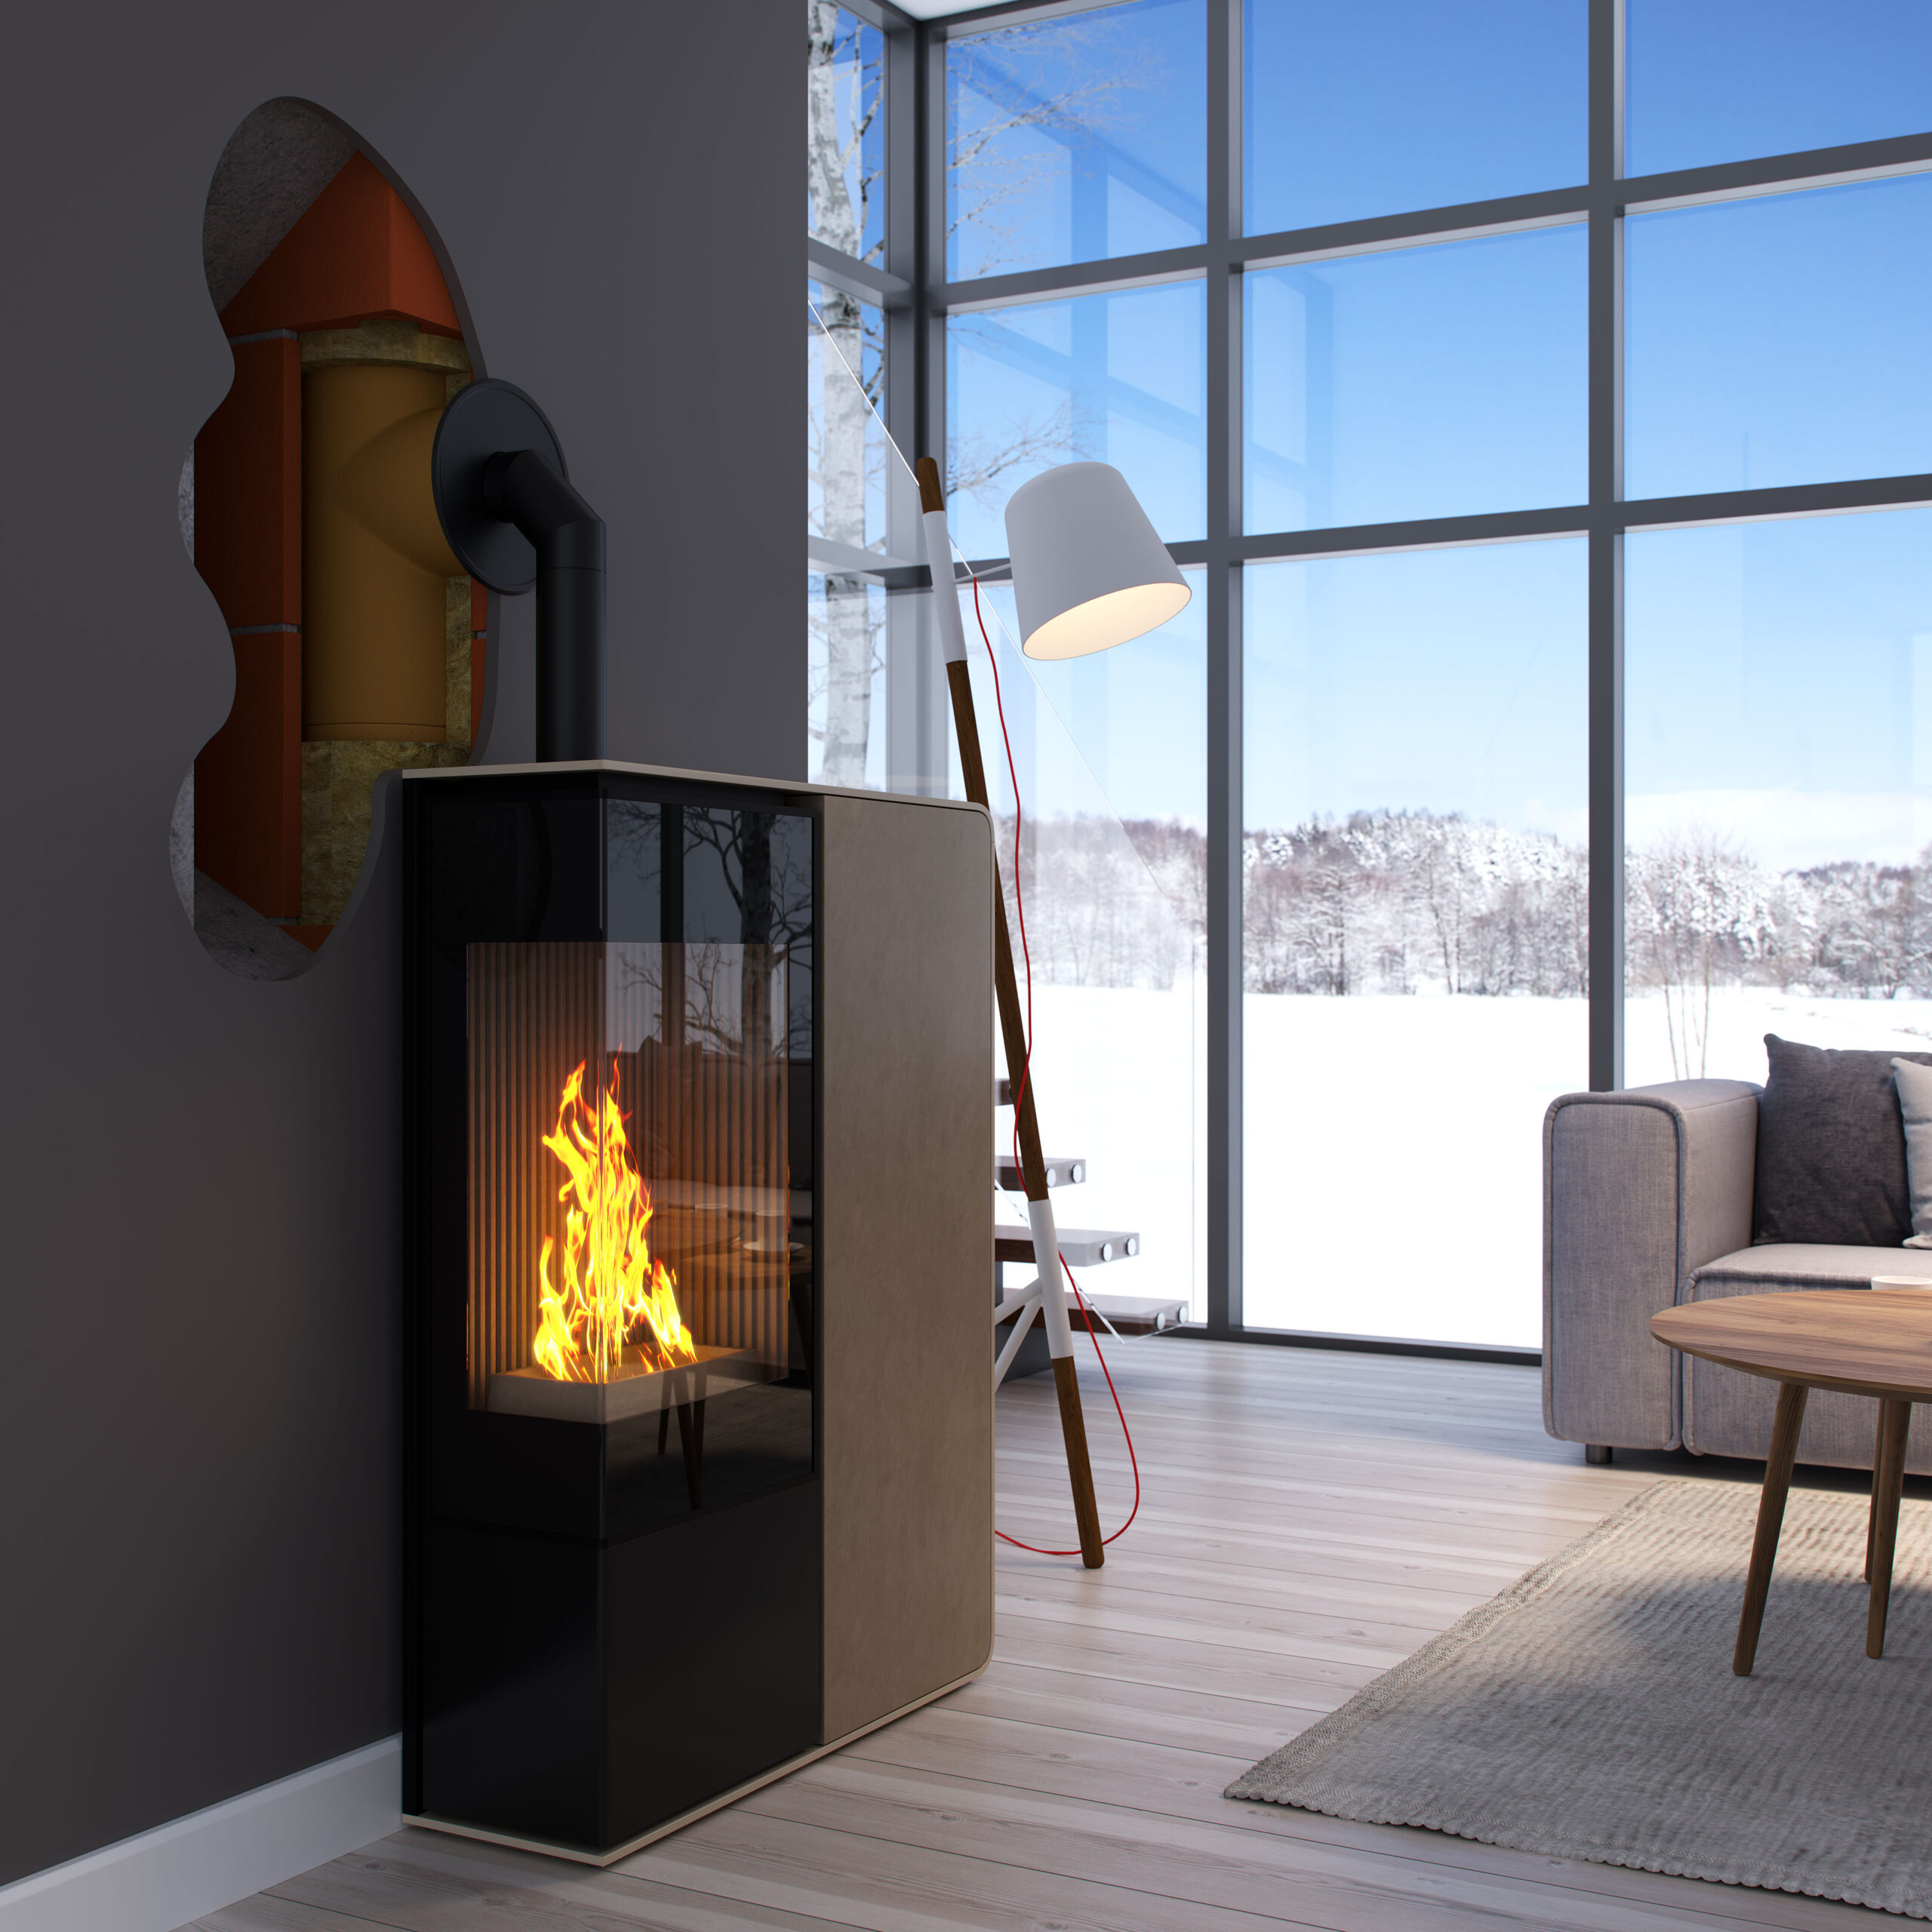 rendering-3d-visualization-technical-product-realistic-3d-corner-fireplace-chimney-connection